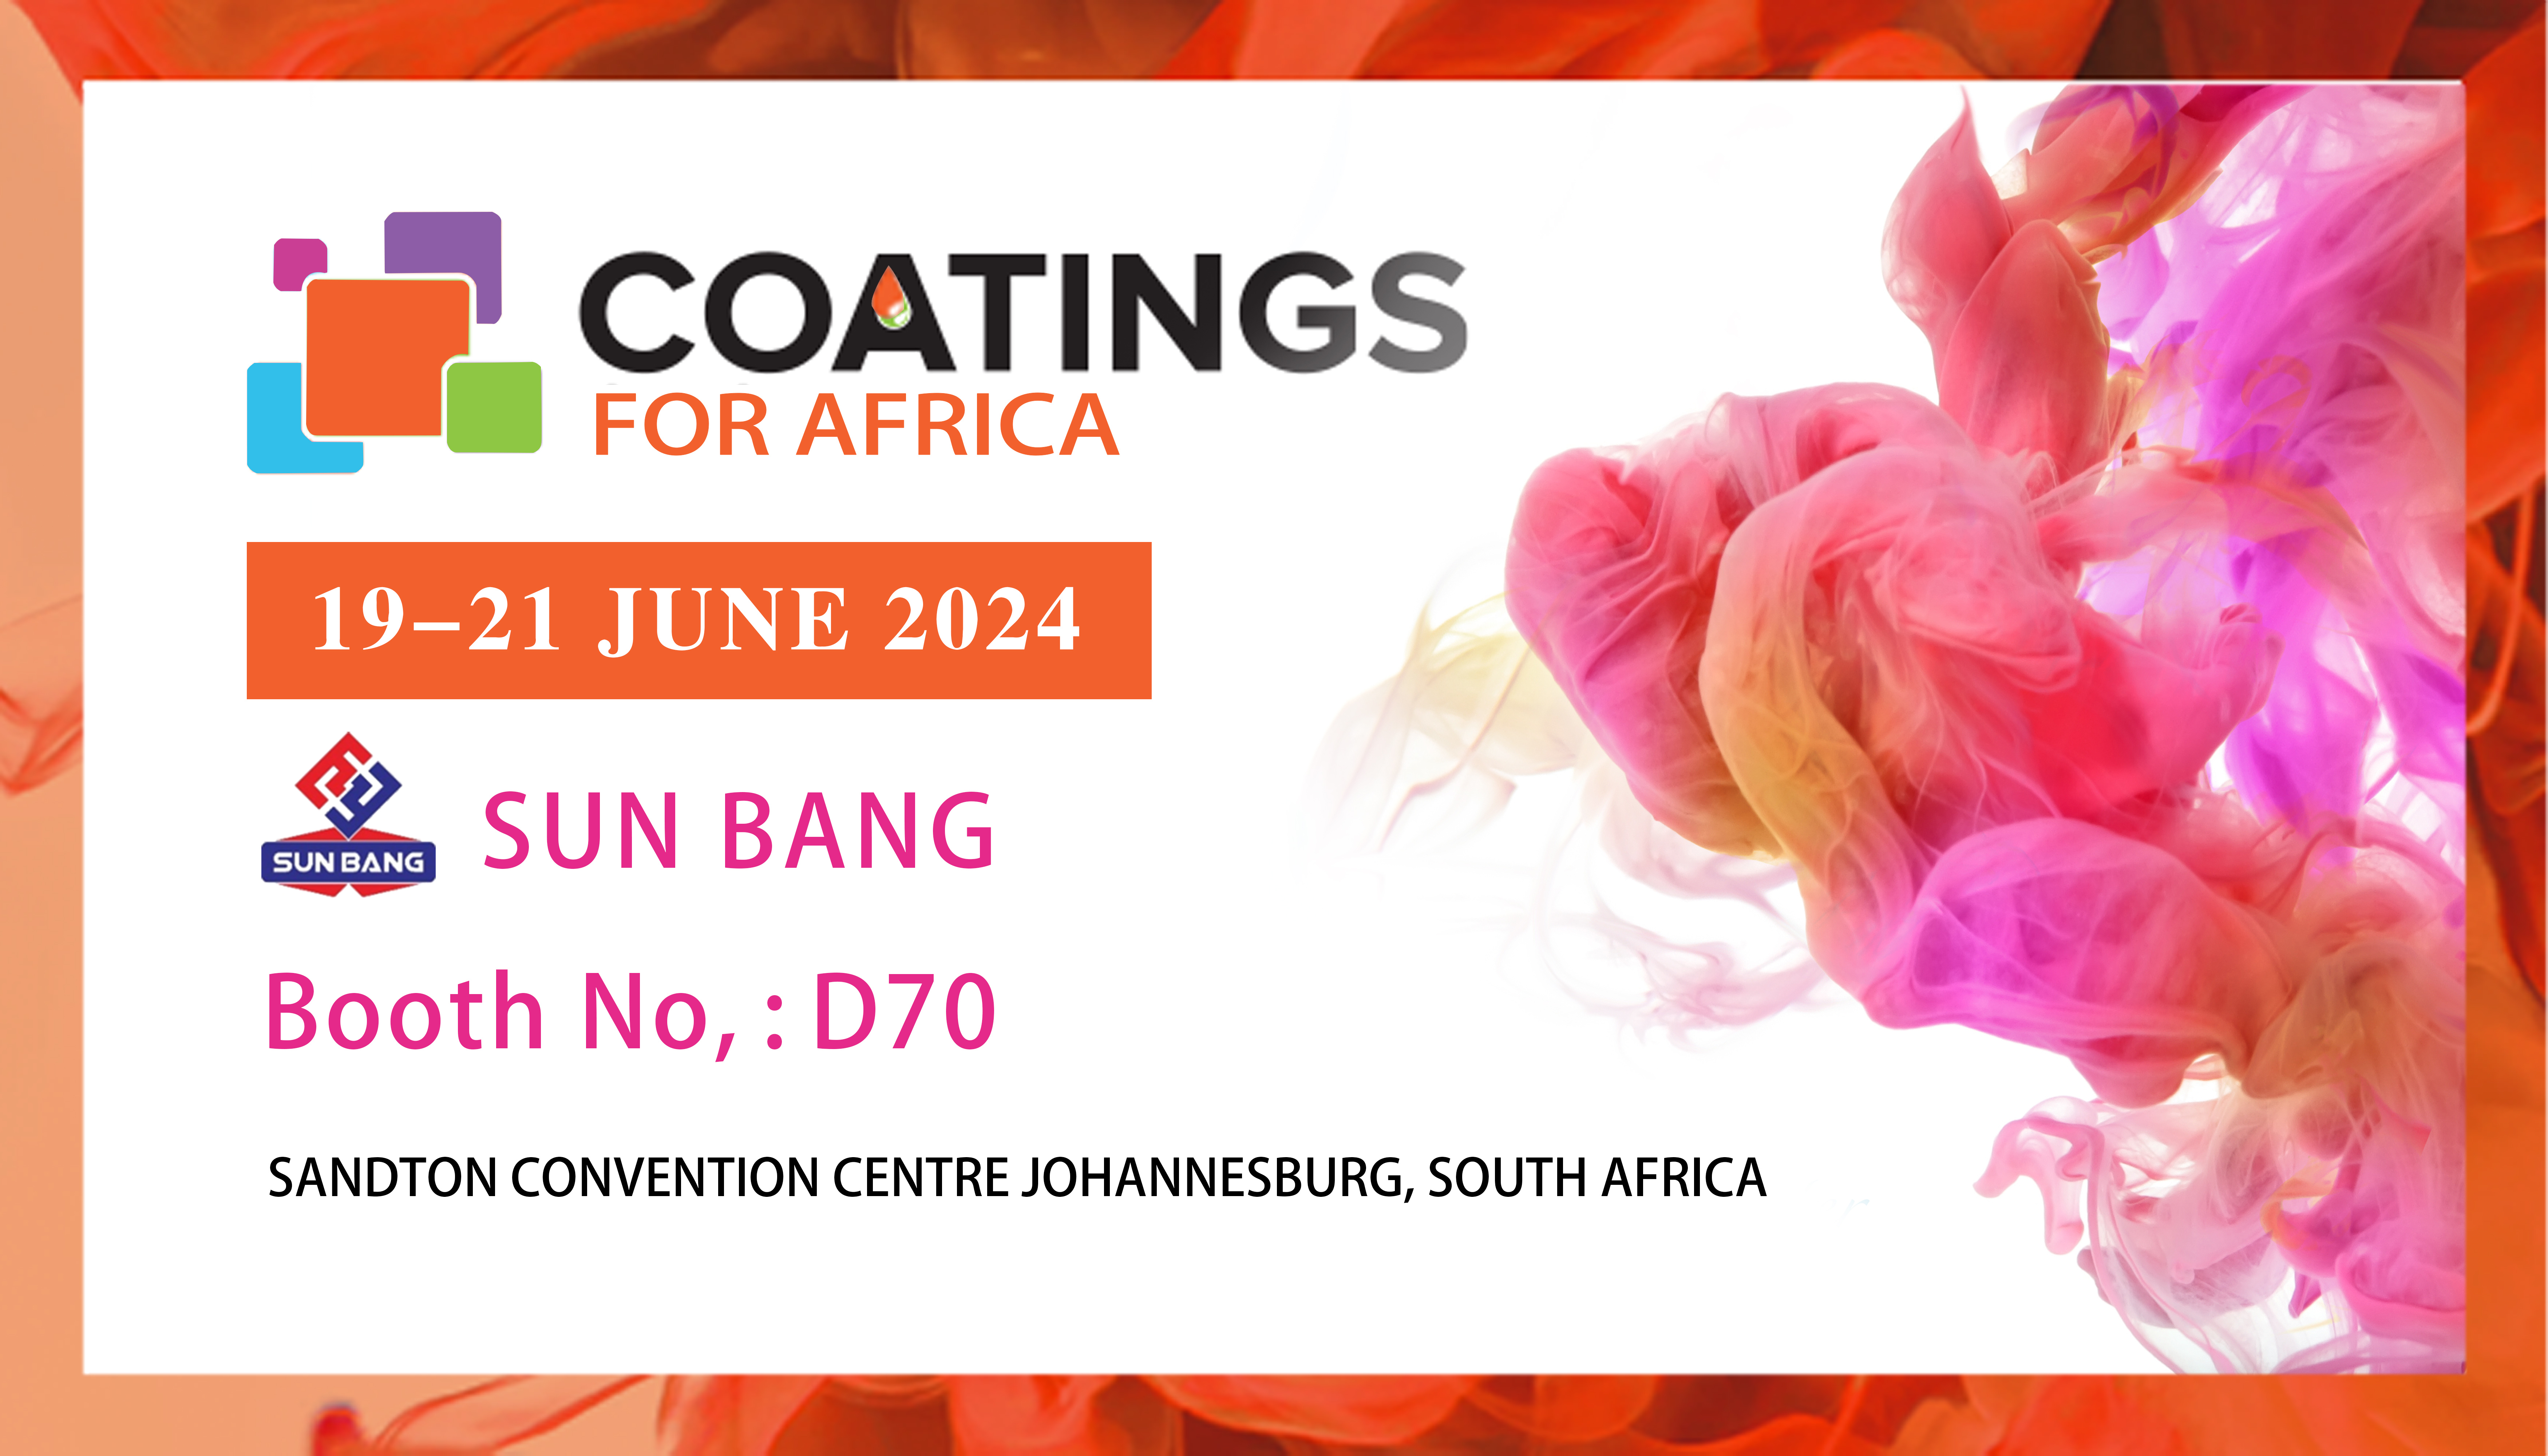 Coatings FOR AFRICA ຈະຈັດຂຶ້ນໃນວັນທີ 19-21 ມິຖຸນາ 2024.Welcome to our booth No.:D70